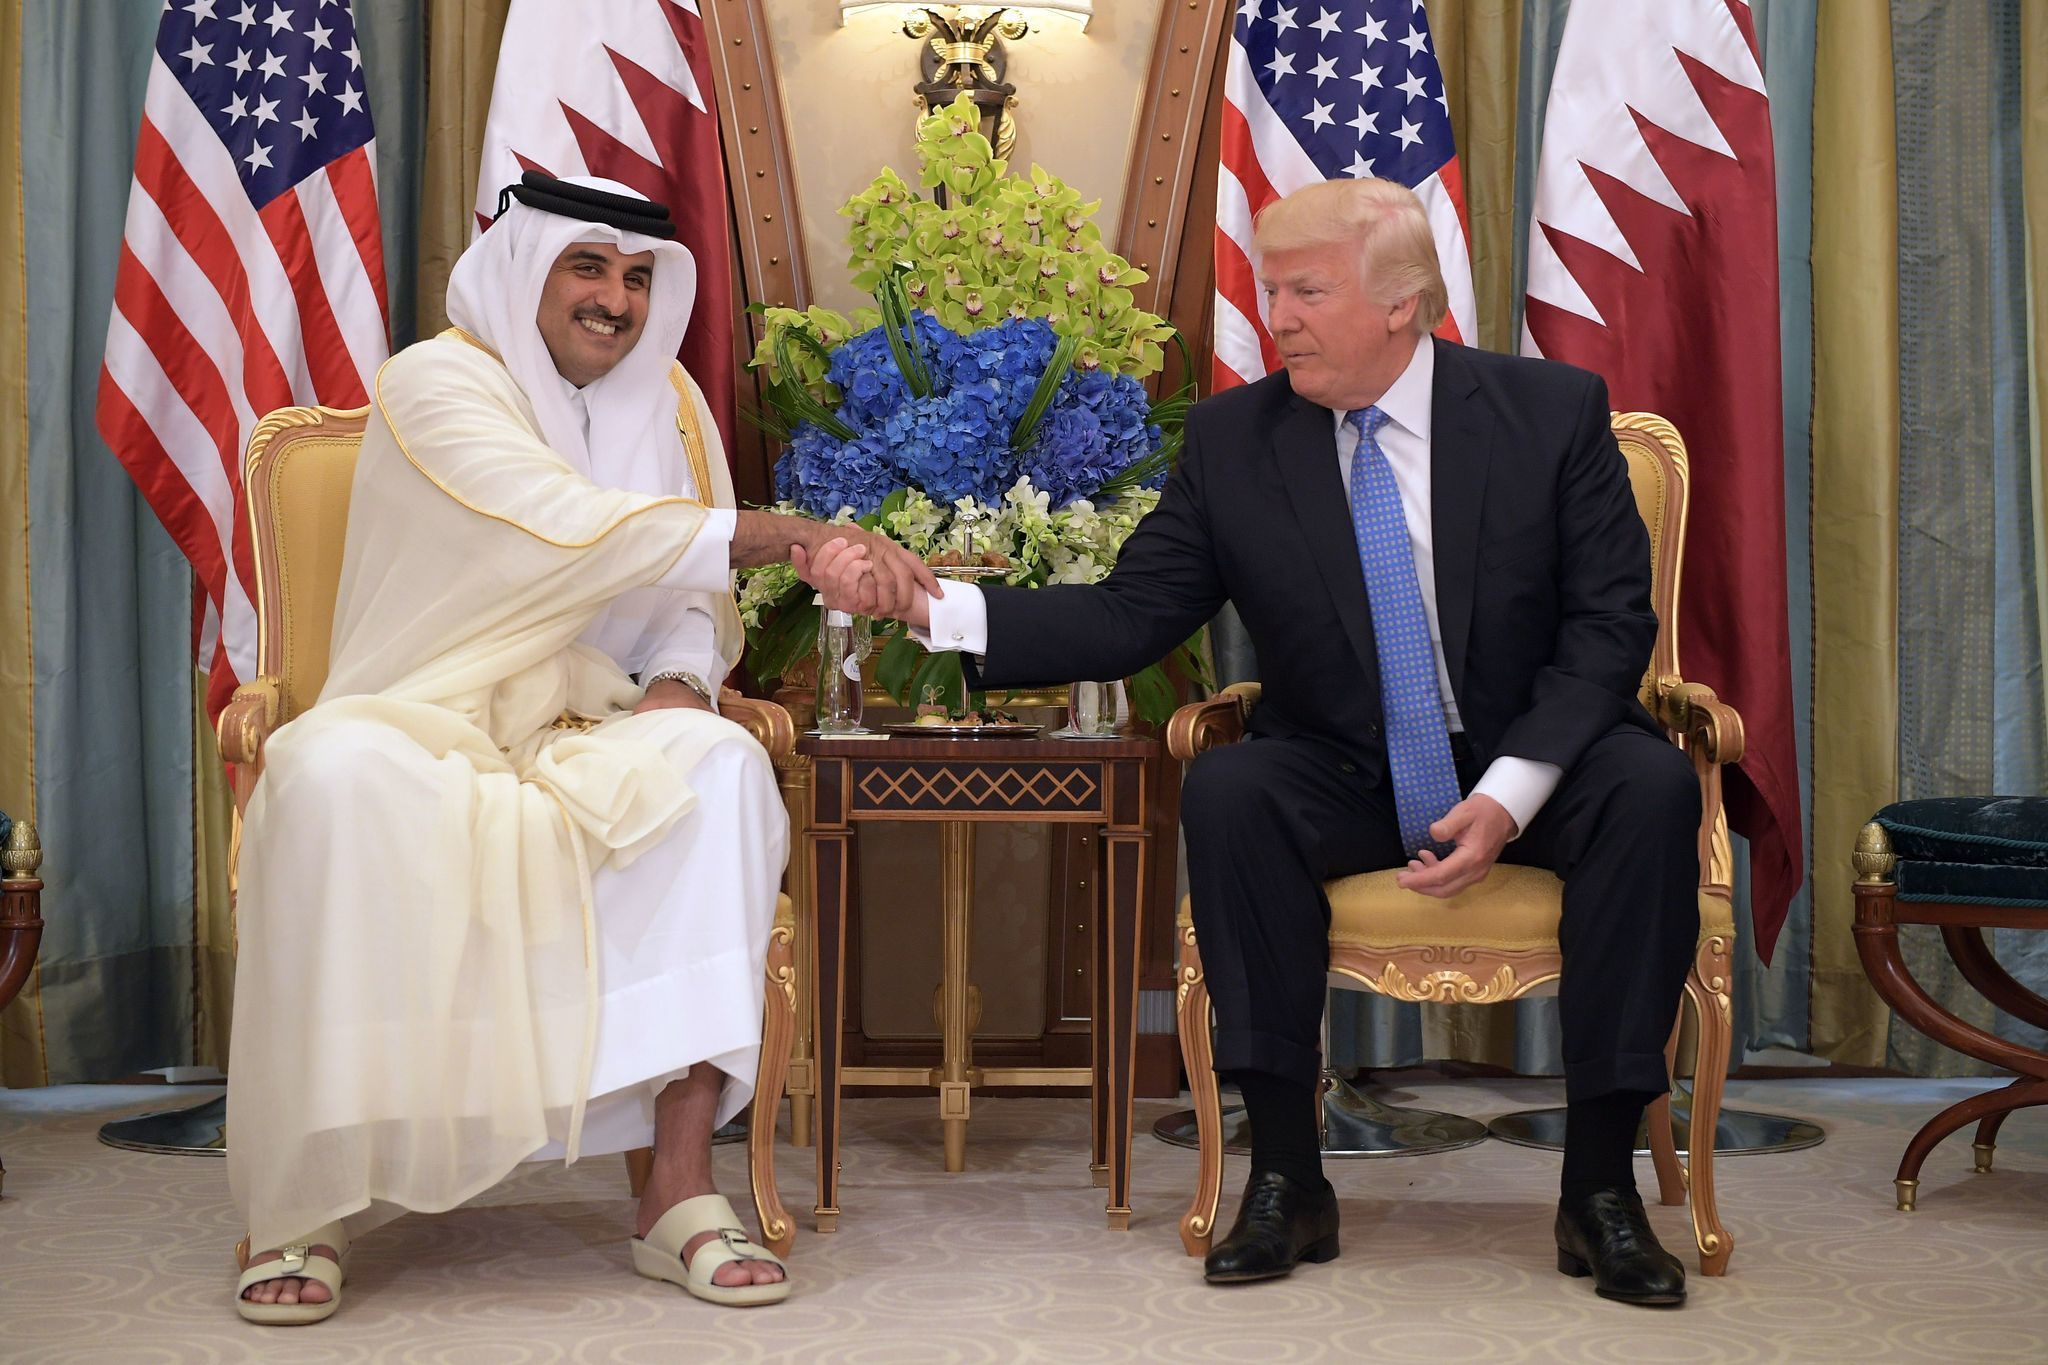 Trump's message to Arab leaders: Do more to fight extremism